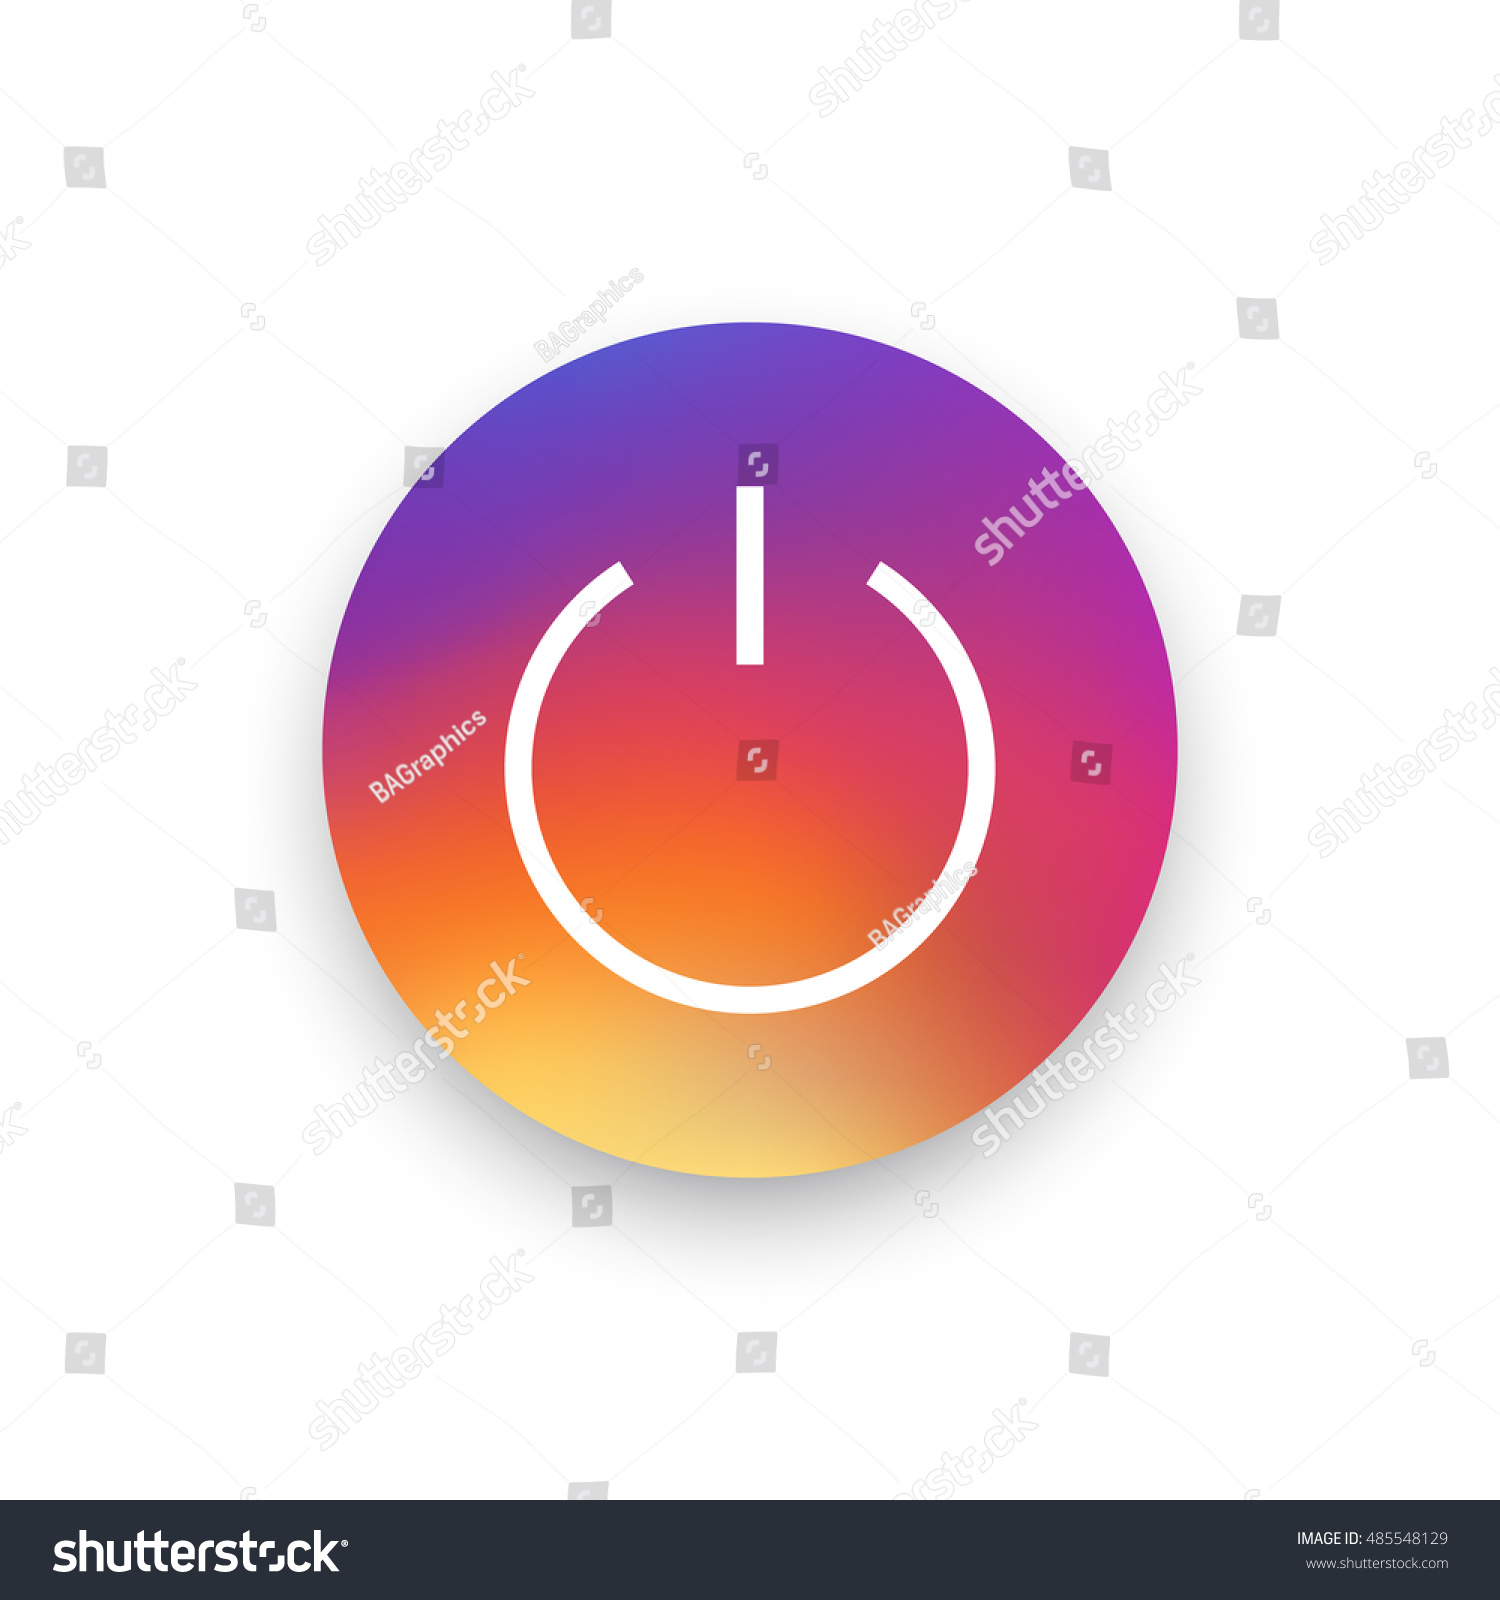 SVG of Power icon vector, clip art. Also useful as logo, circle app icon, web UI element, symbol, graphic image, silhouette and illustration. Compatible with ai, cdr, jpg, png, pdf, svg and eps formats. svg